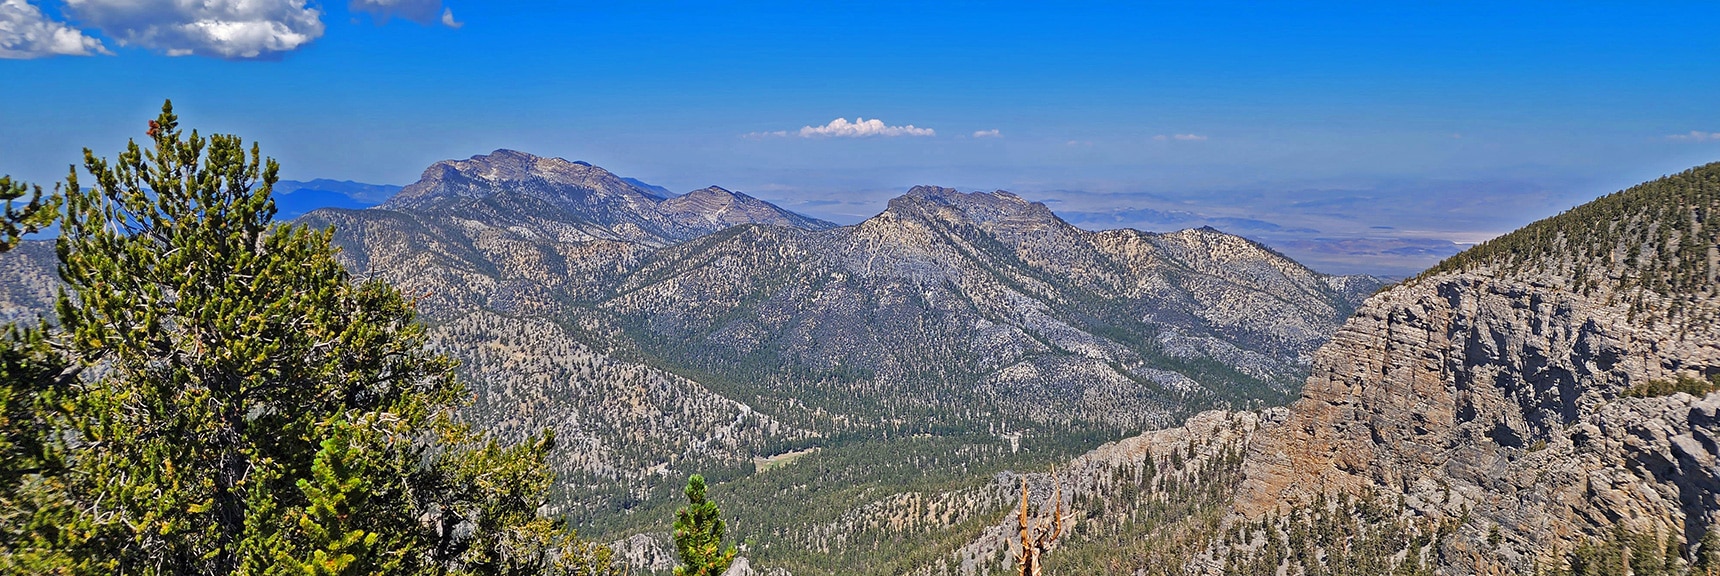 McFarland Peak (Left) to Black Rock Sister (Right) from Lee/Kyle Canyon Upper Ridgeline | Mummy Mountain Grand Crossing | Lee Canyon to Deer Creek Road | Mt Charleston Wilderness | Spring Mountains, Nevada |